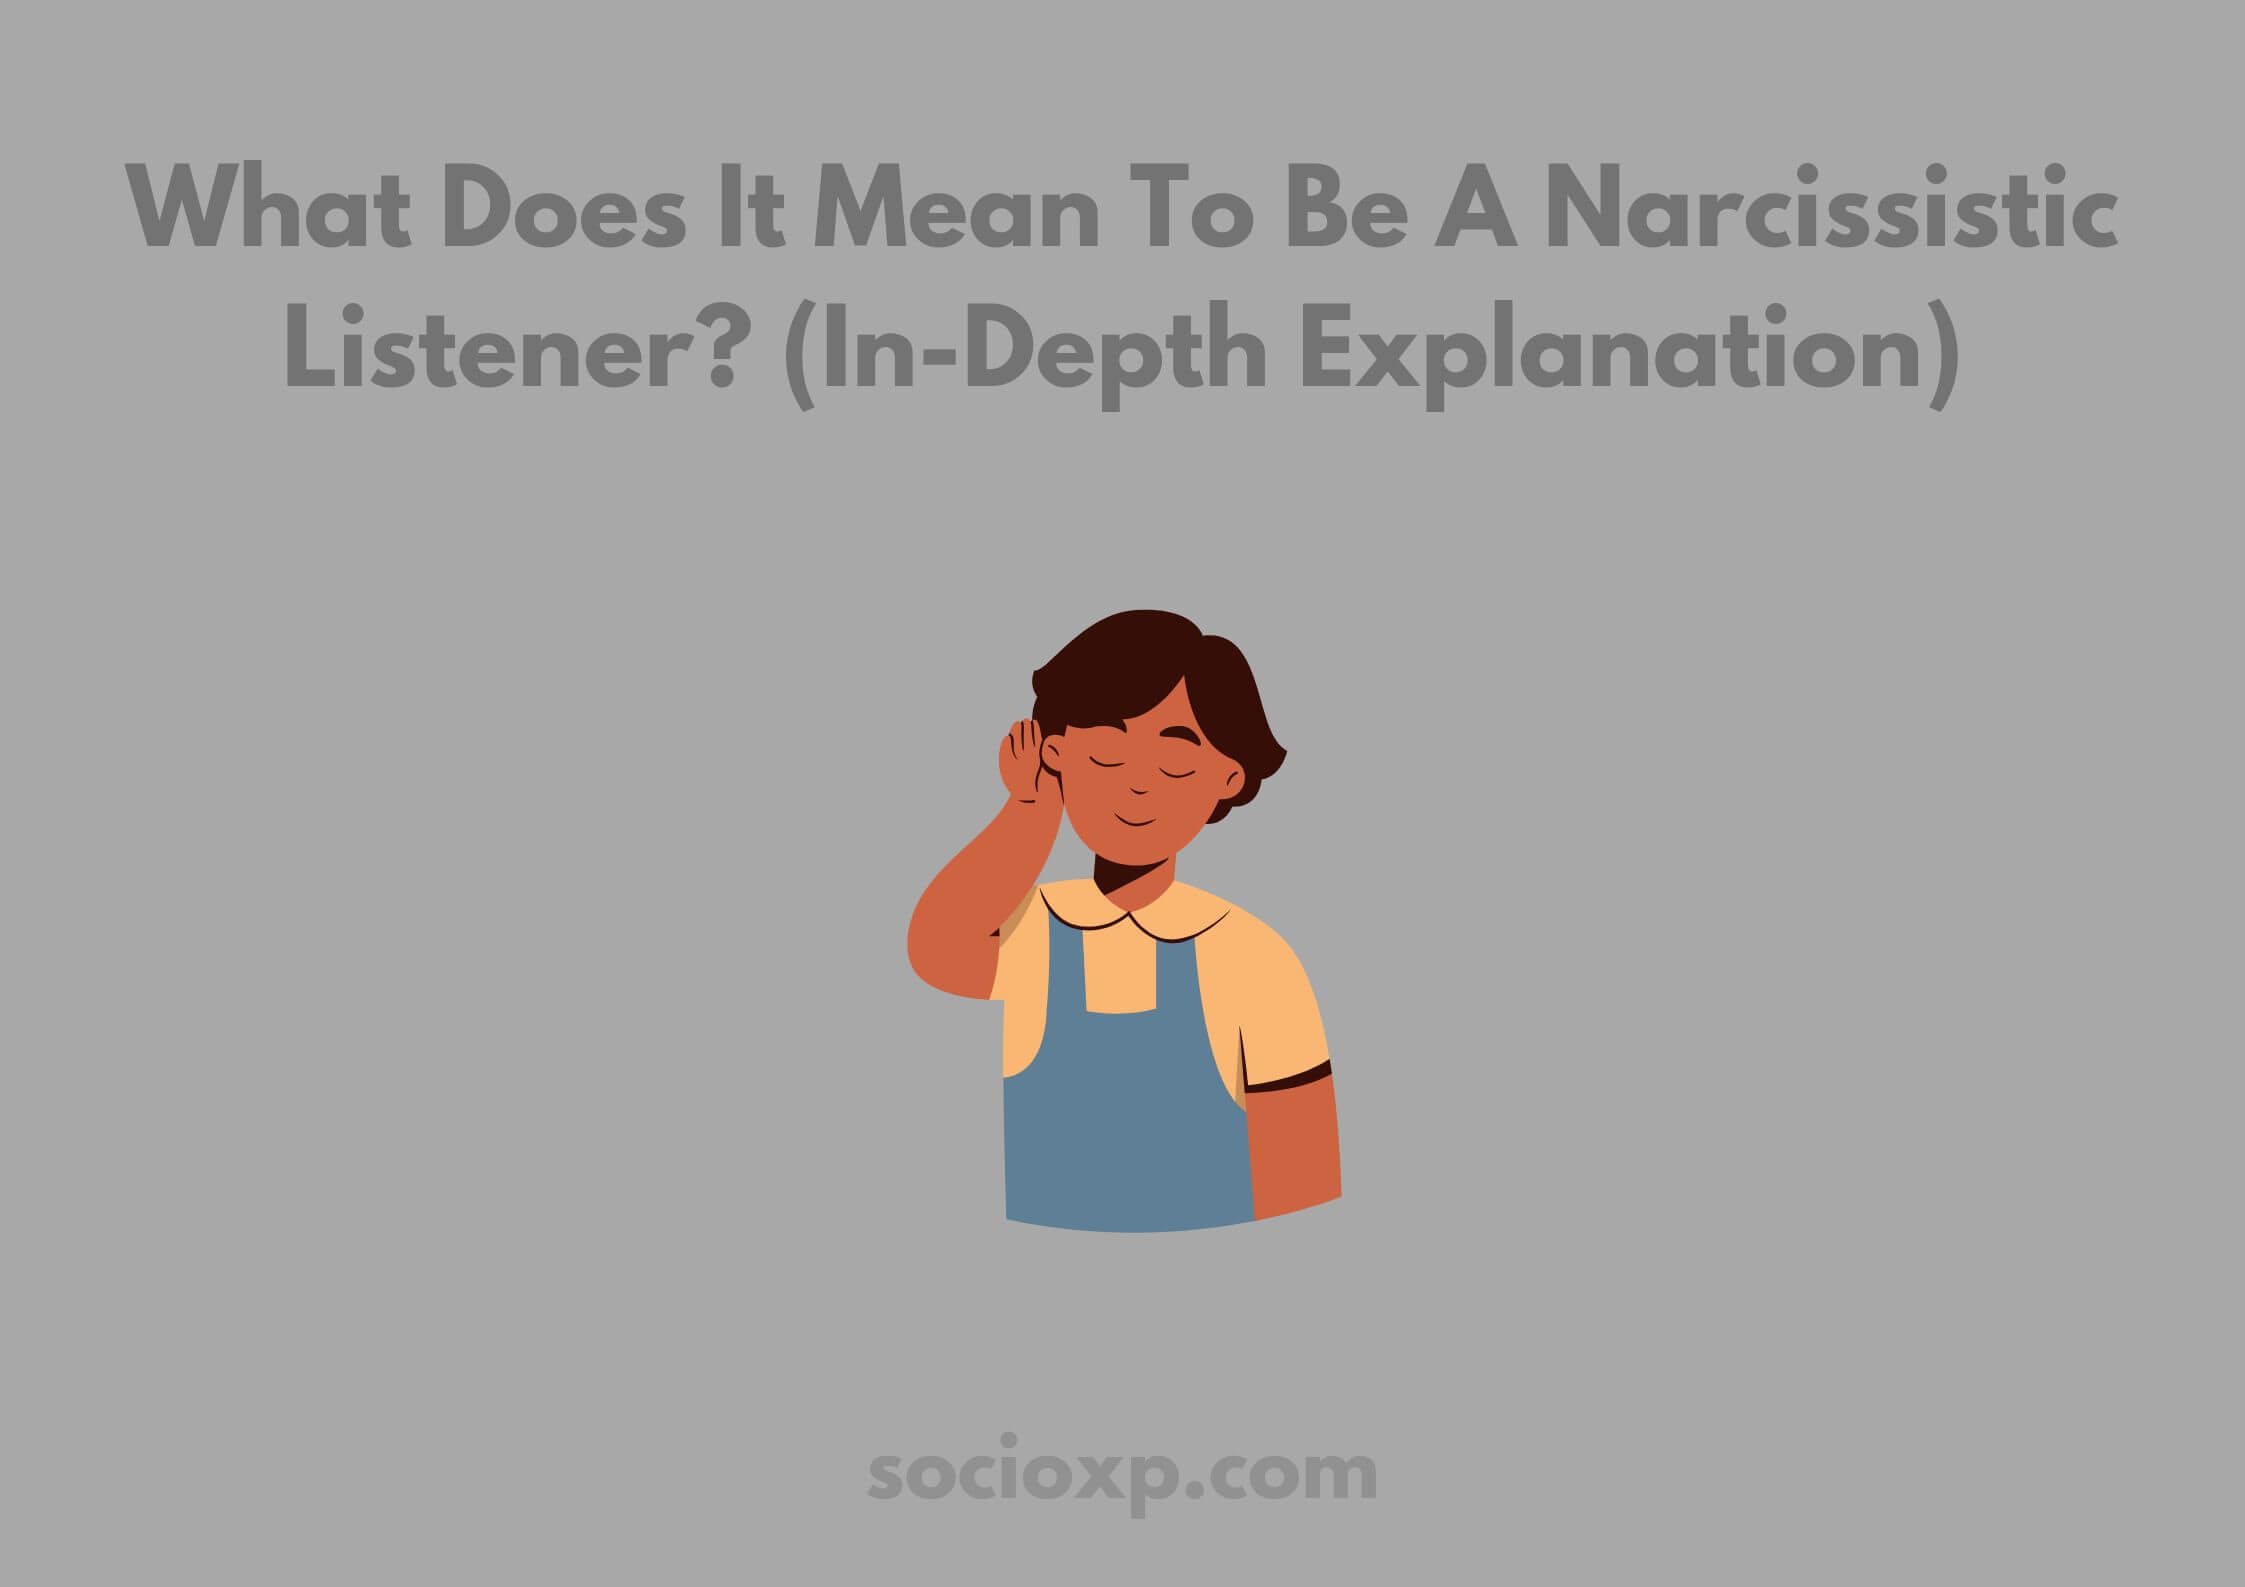 What Does It Mean To Be A Narcissistic Listener? (In-Depth Explanation)